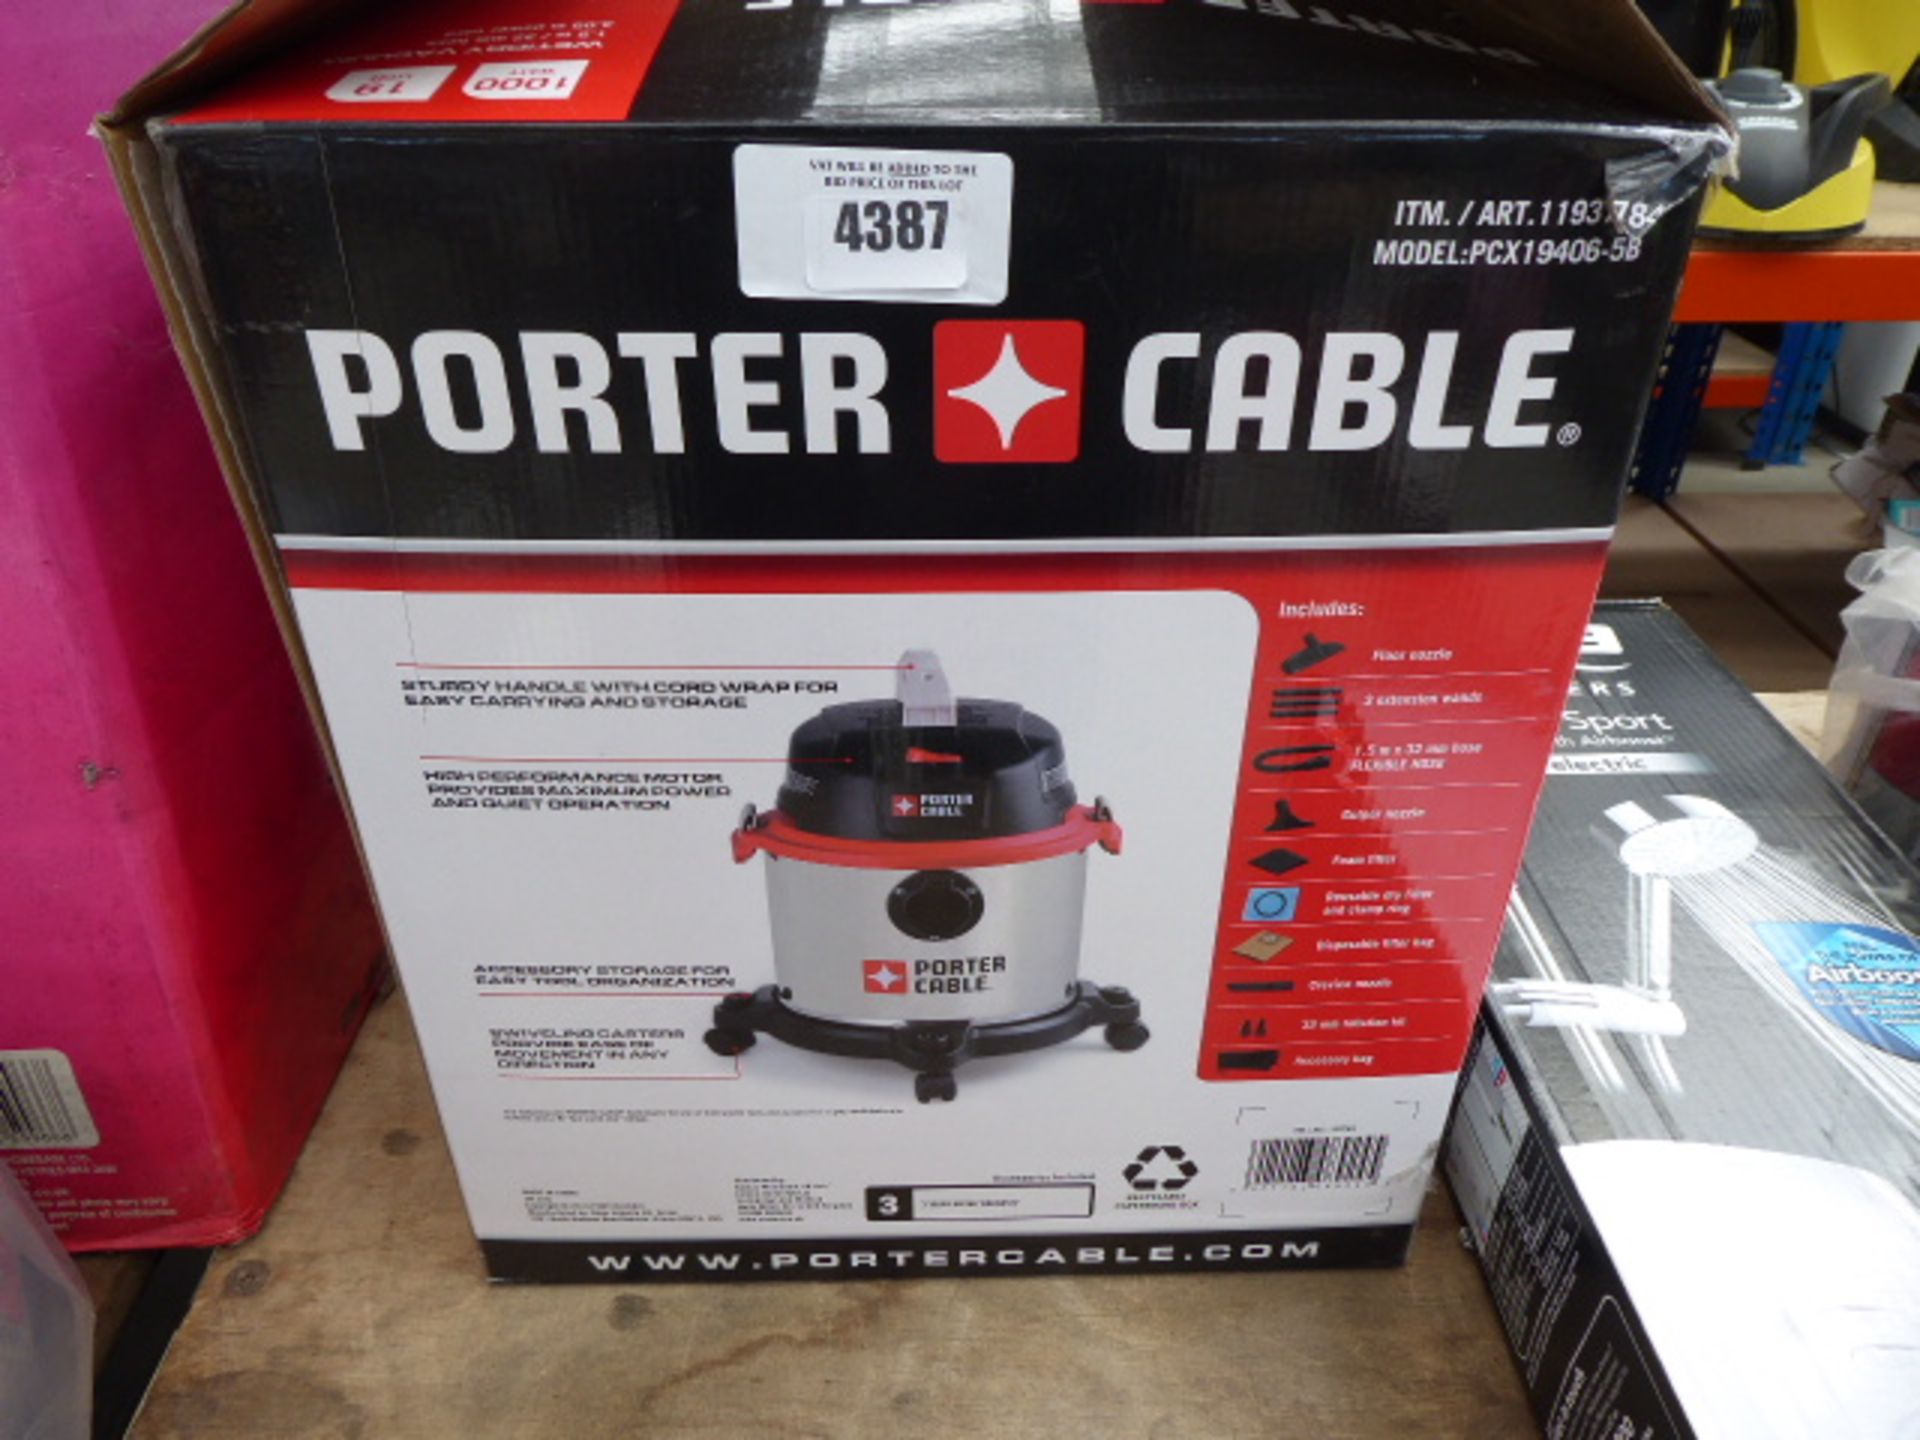 A Porter Cable vacuum